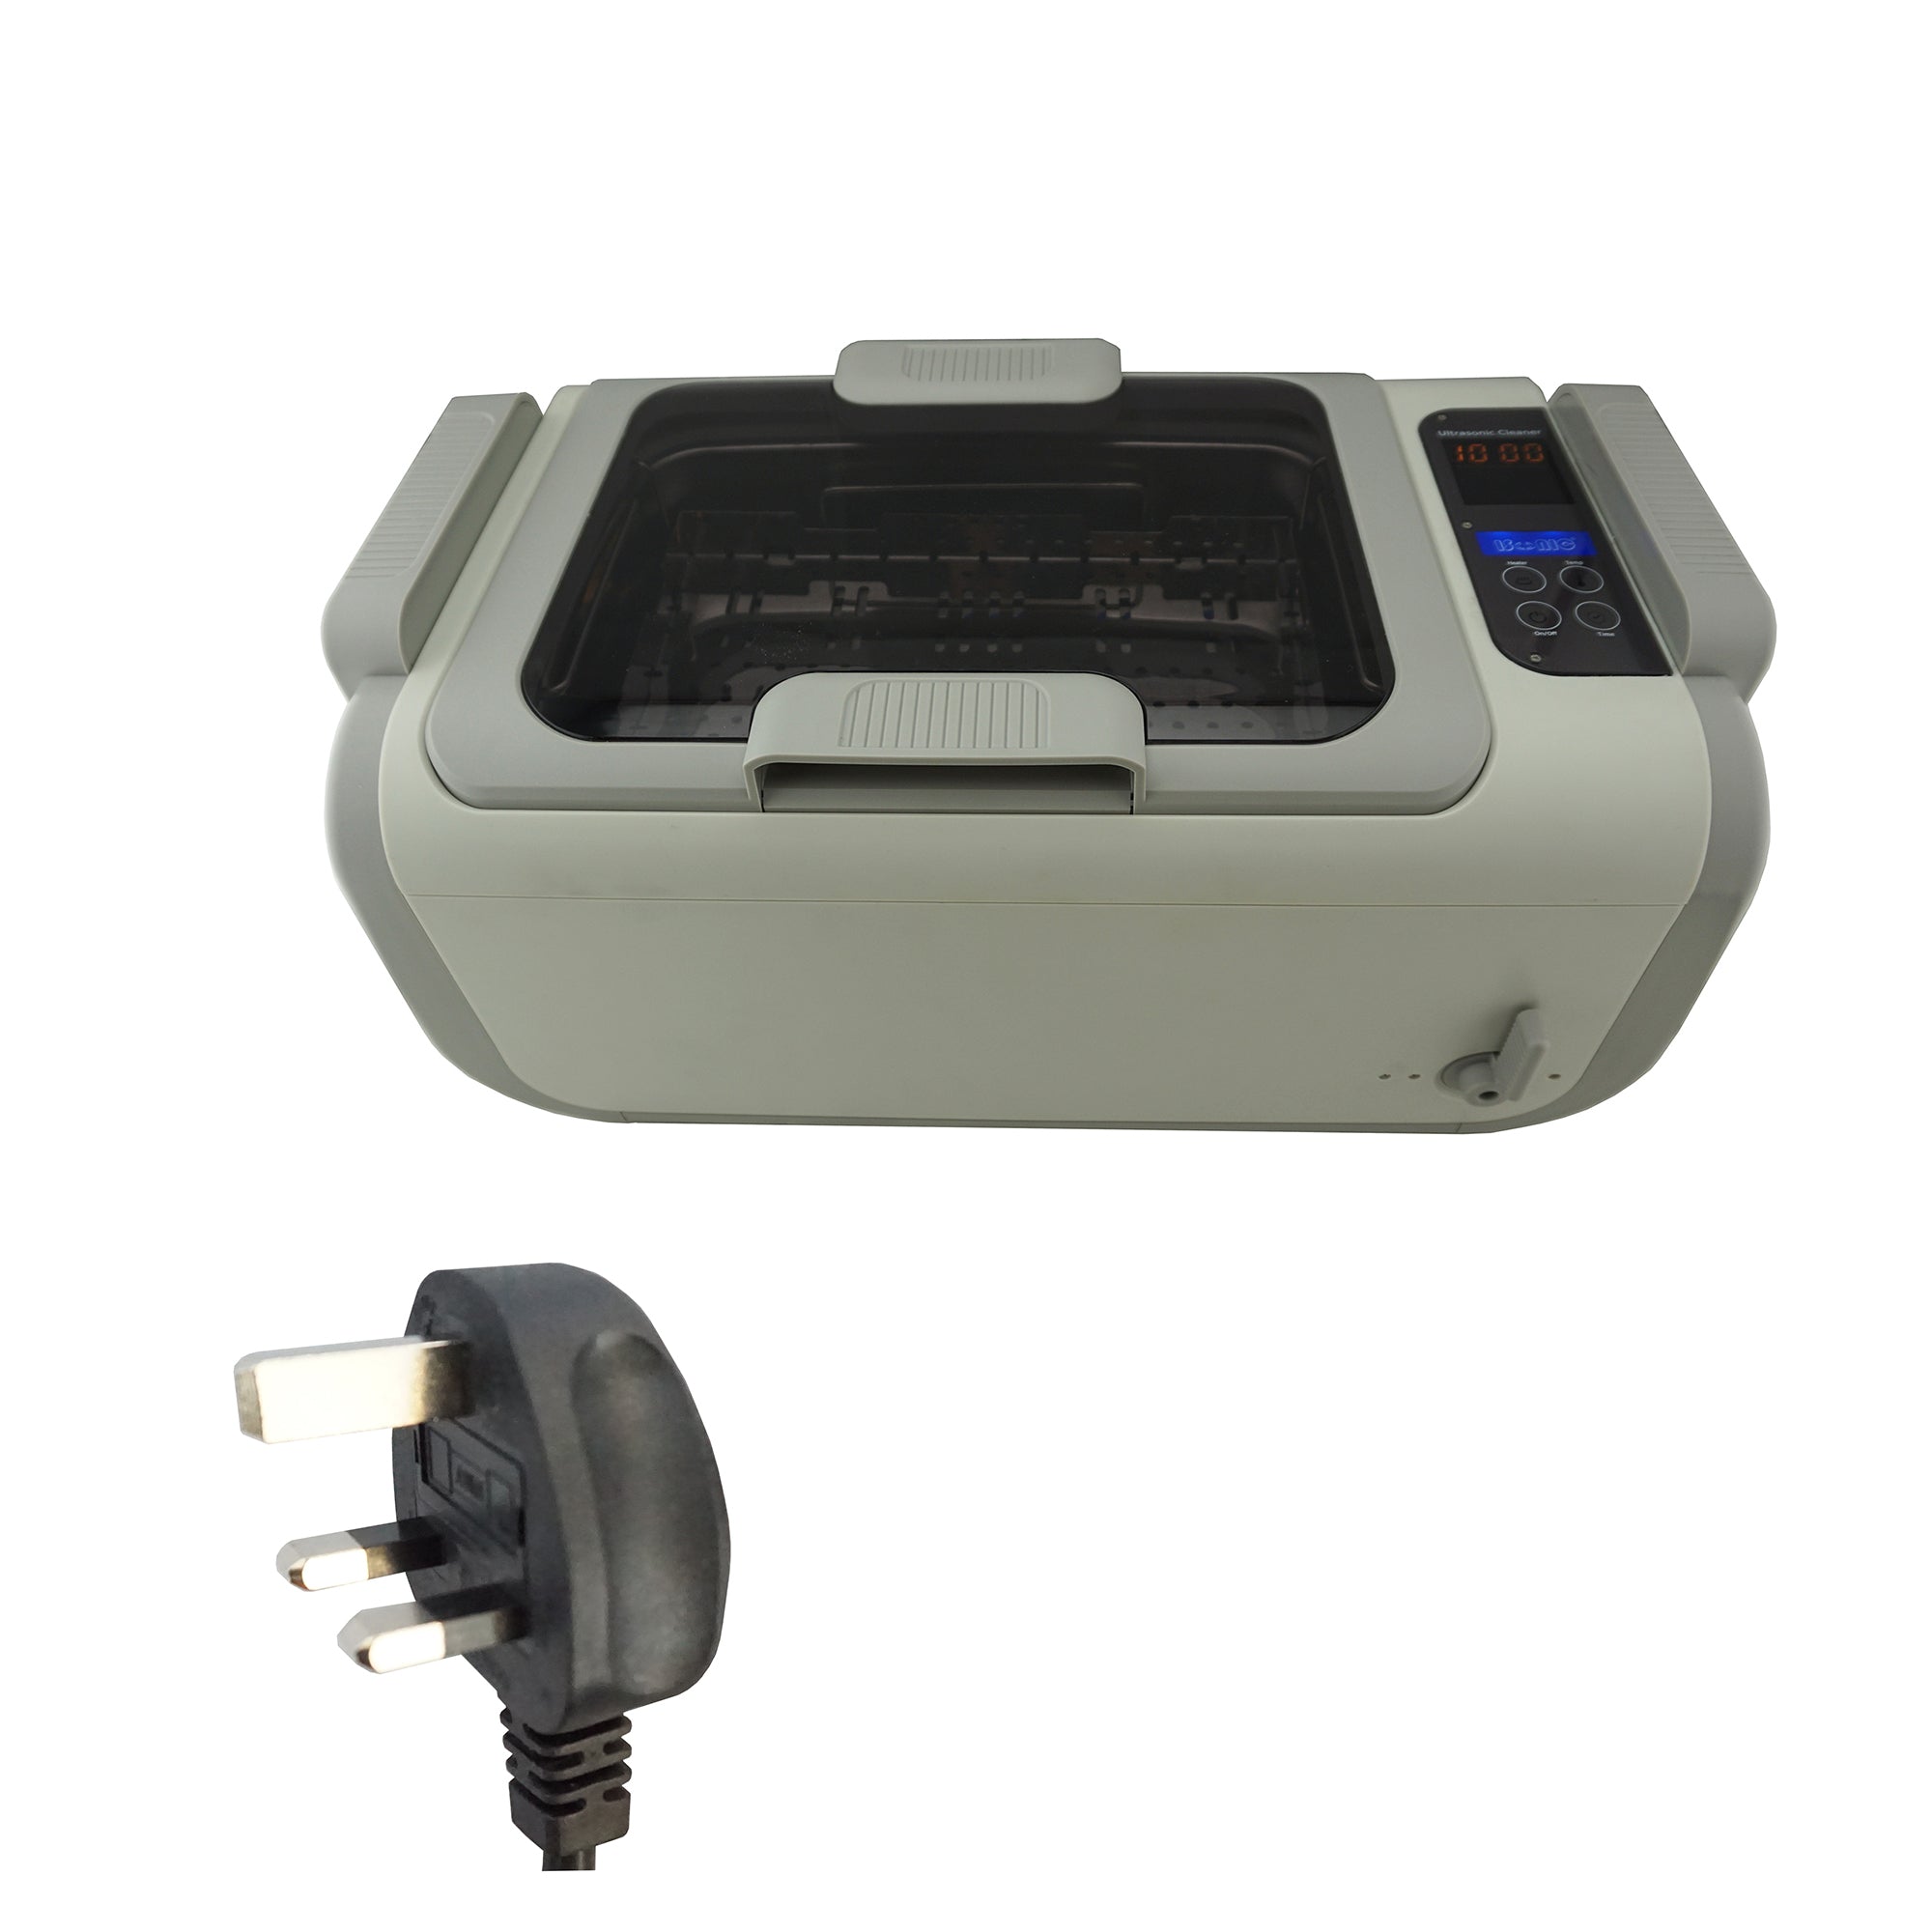 P4875(II)-4T-NH | iSonic? Commercial Ultrasonic Cleaner, 2Gal/7.5L (for dental, veterinary, tattoo, piercing, surgical & other medical applications)